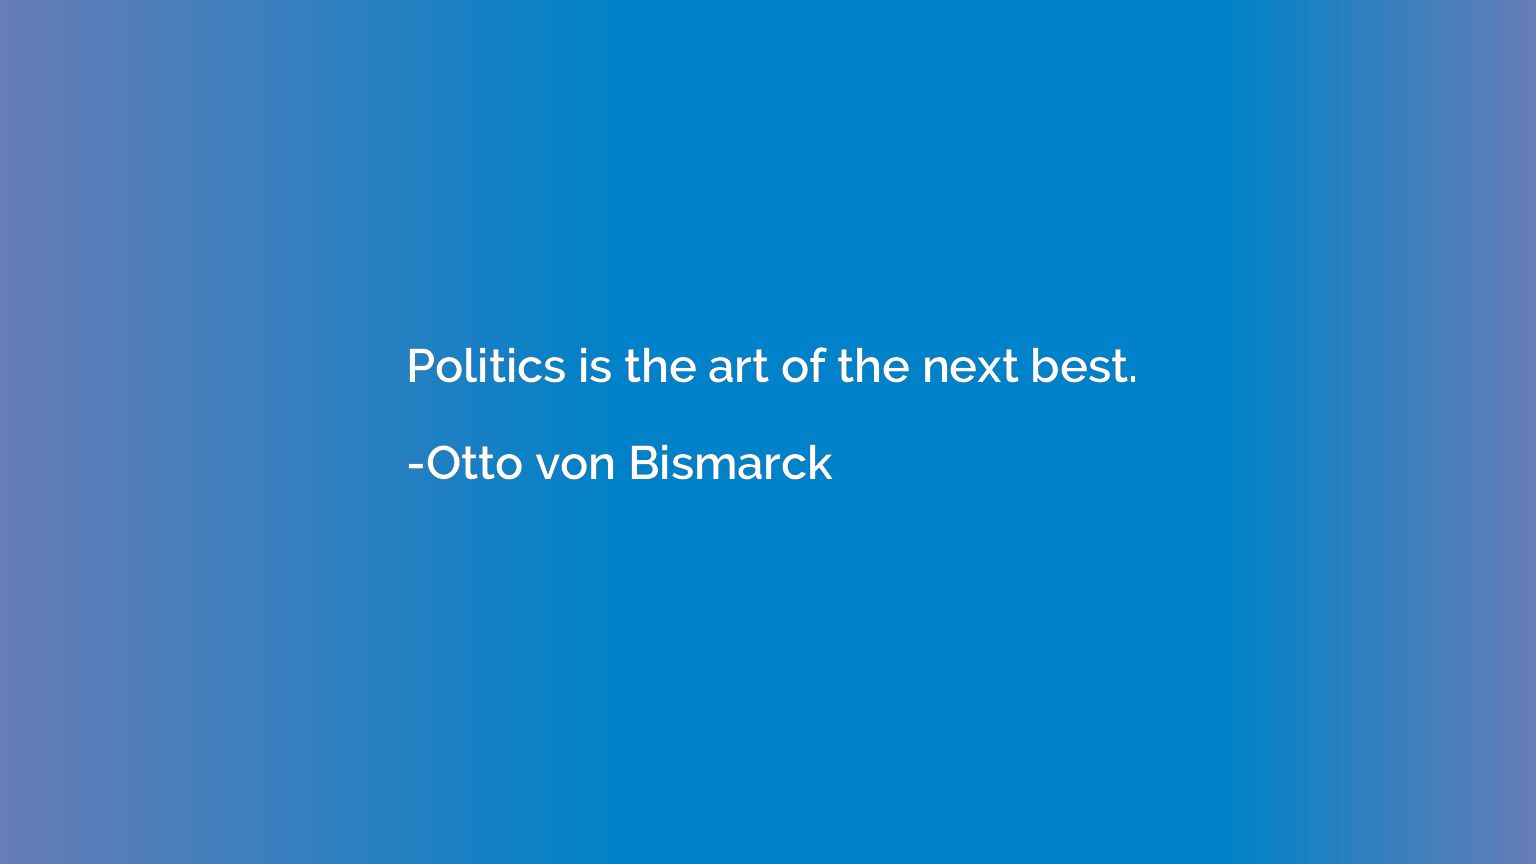 Politics is the art of the next best.